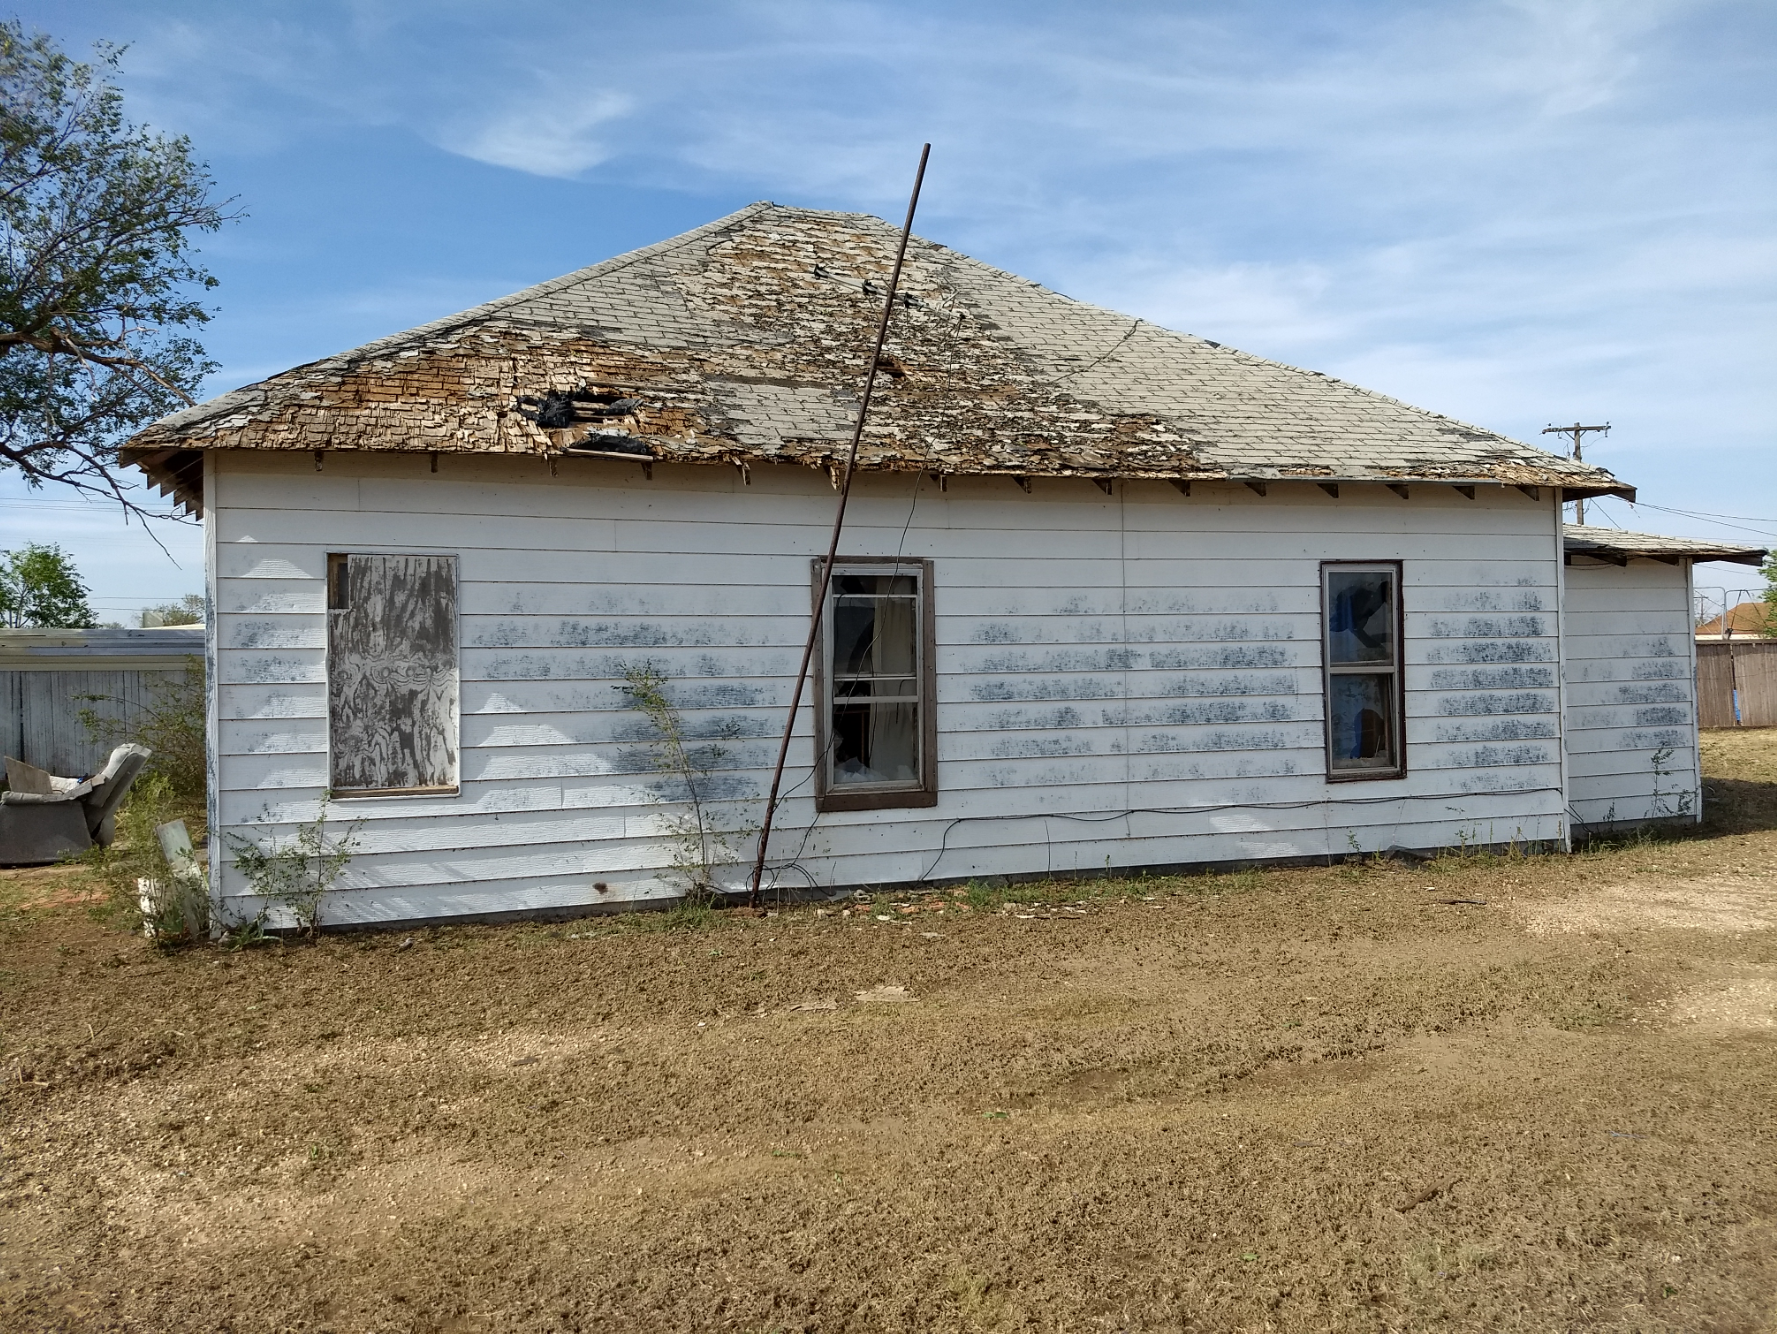 Damage sustained to buildings in Ralls, TX, on the evening of 1 June 2018.